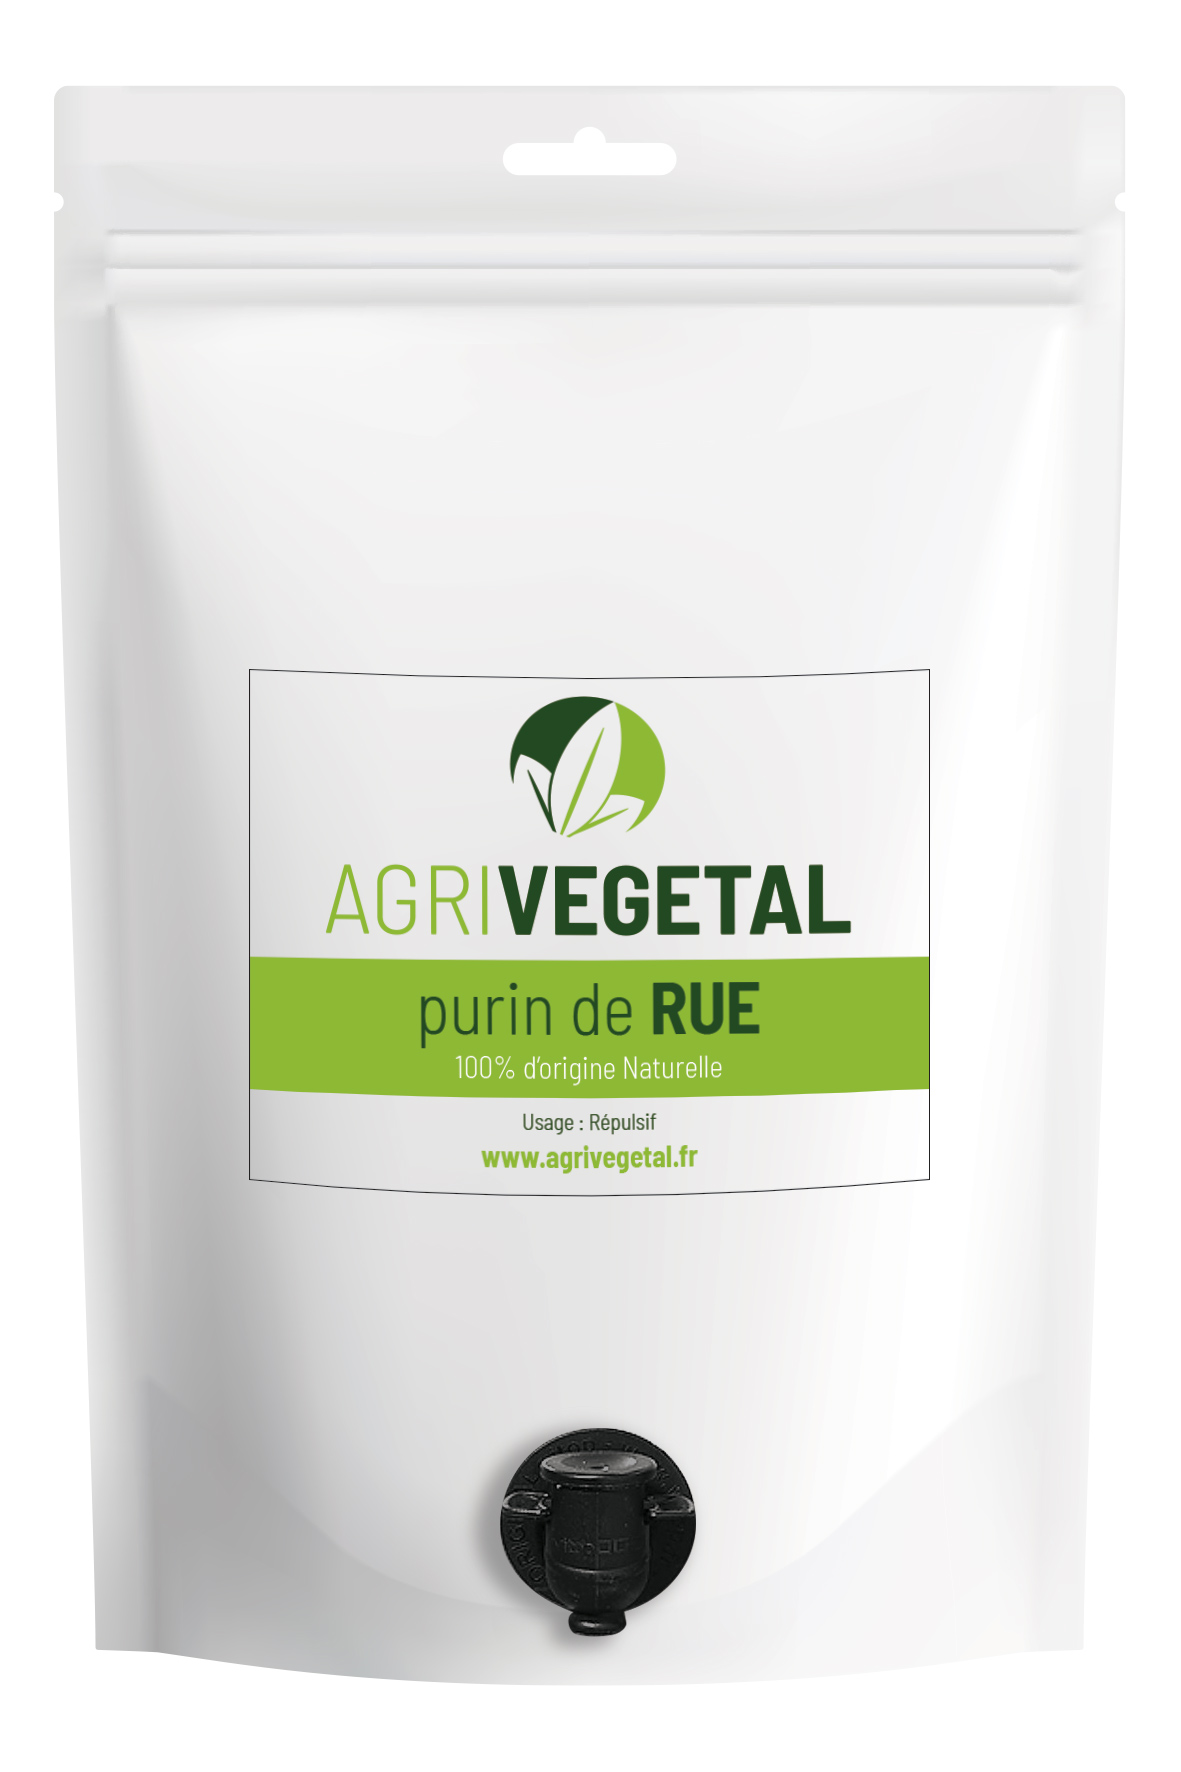 AGRIVEGETAL-PURIN-RUE